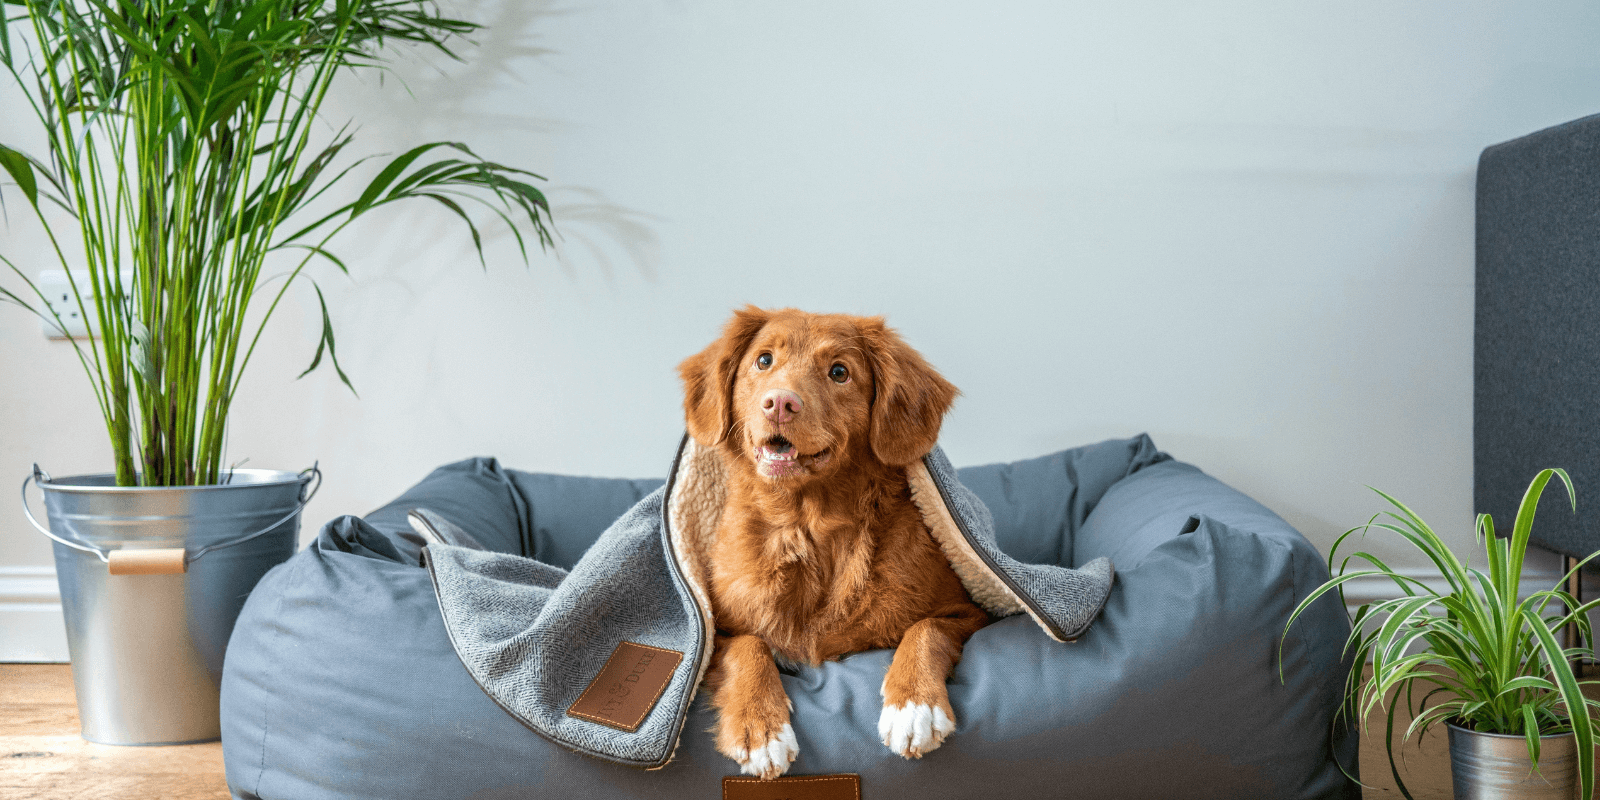 Golden long-haired dog looking happy inside a dog bed